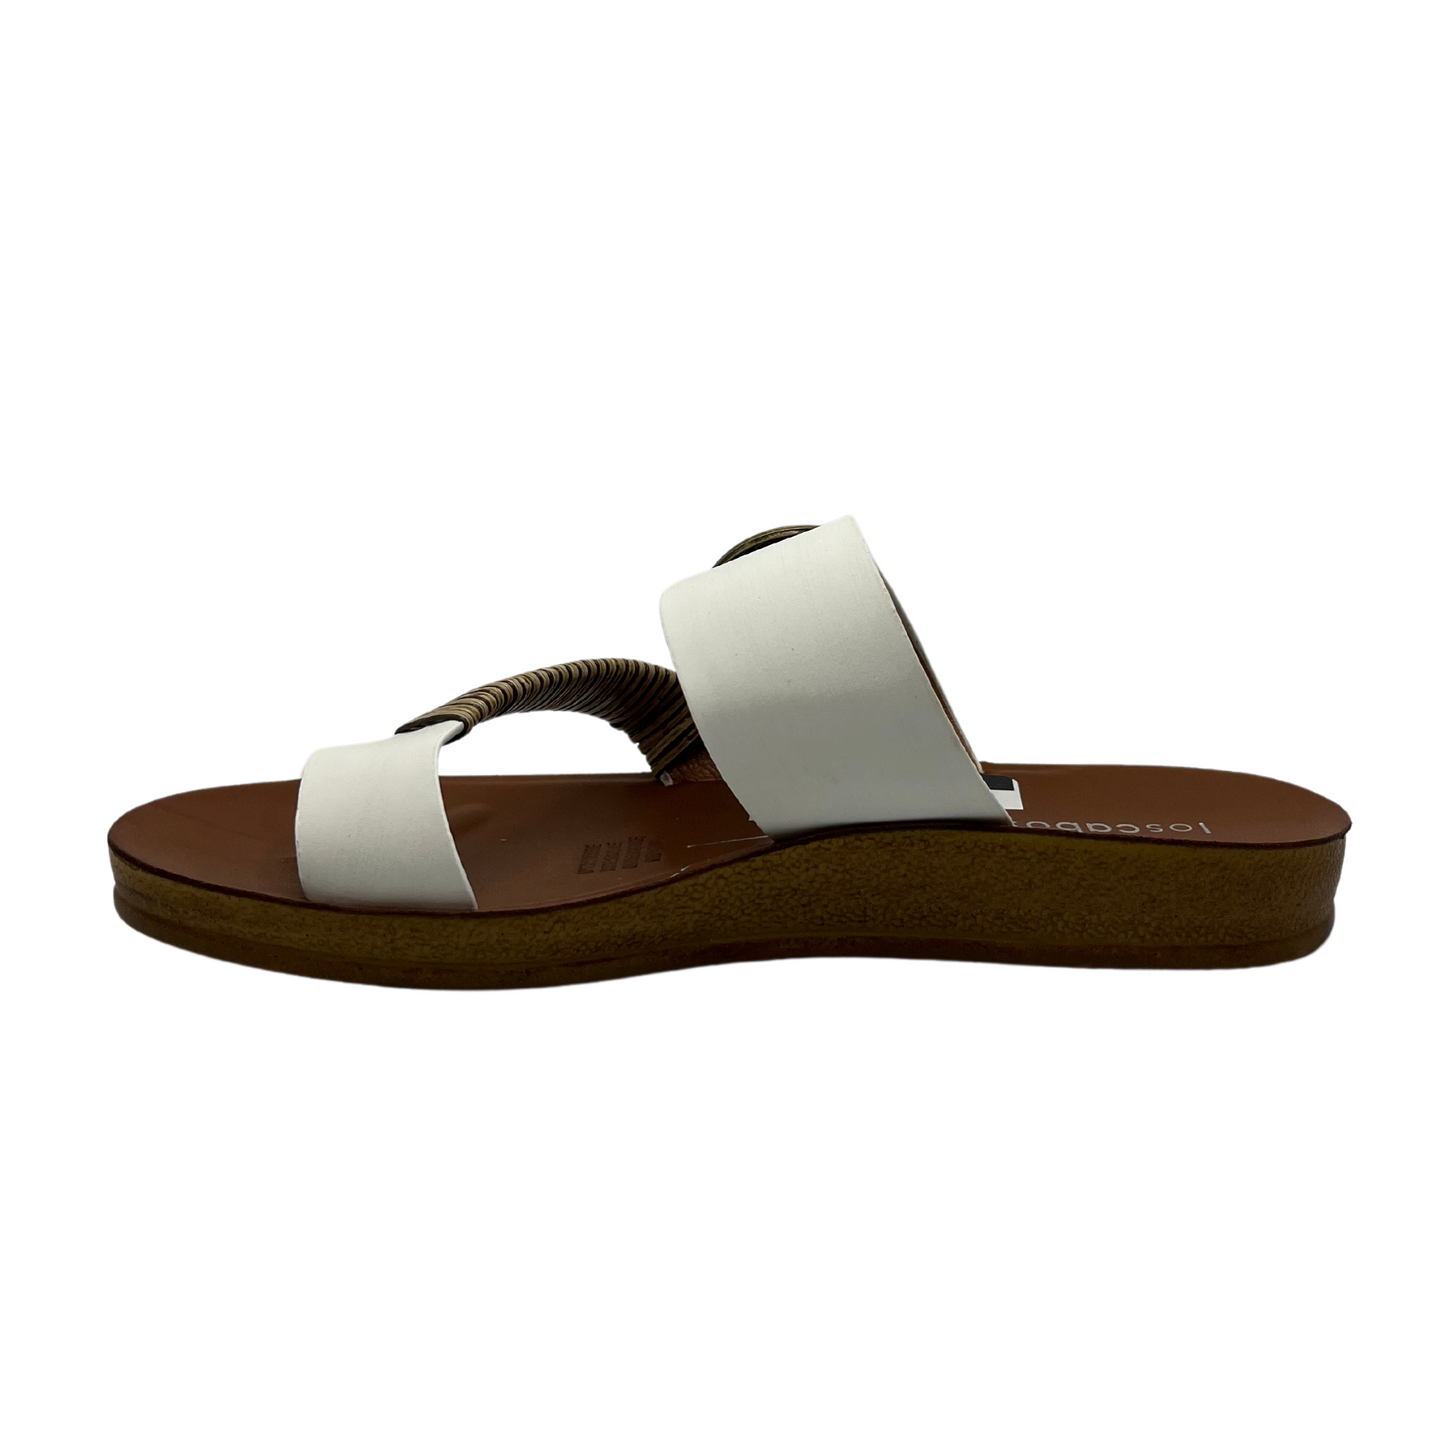 Left facing view of white leather sandal with gold buckle and brown insole